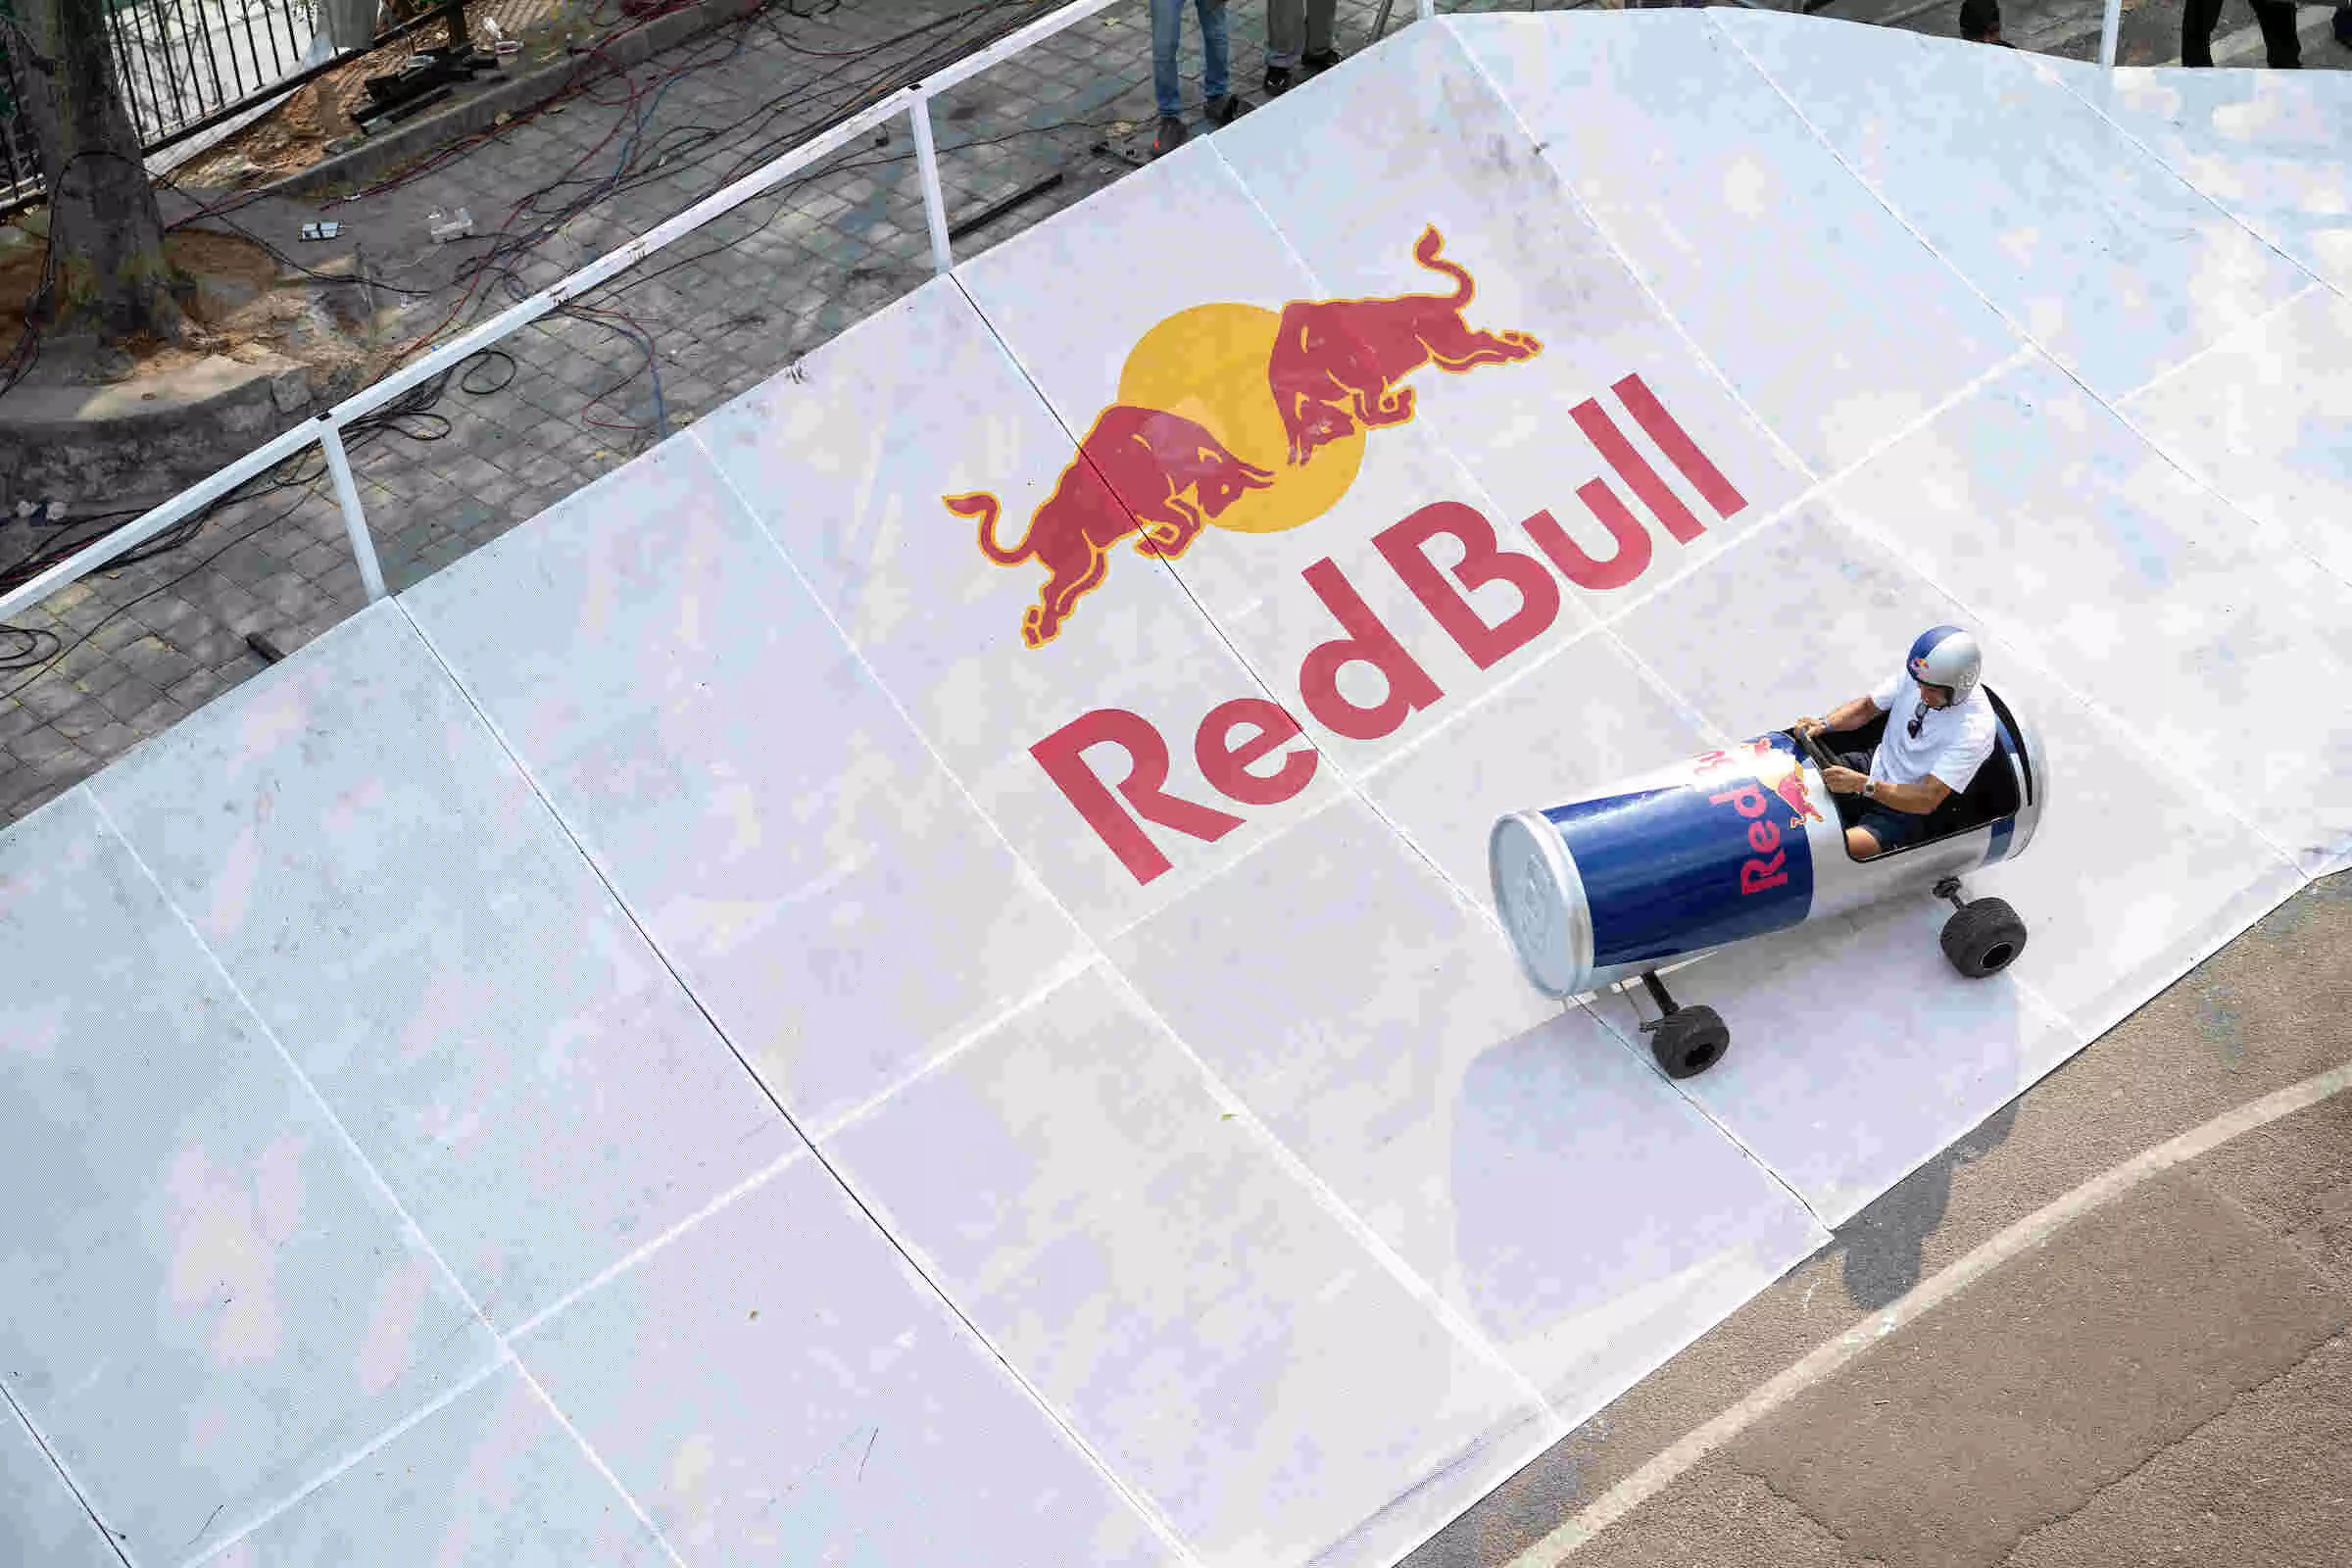 Thrills, spills: Red Bull Soapbox Race entertains thousands in Hyderabad